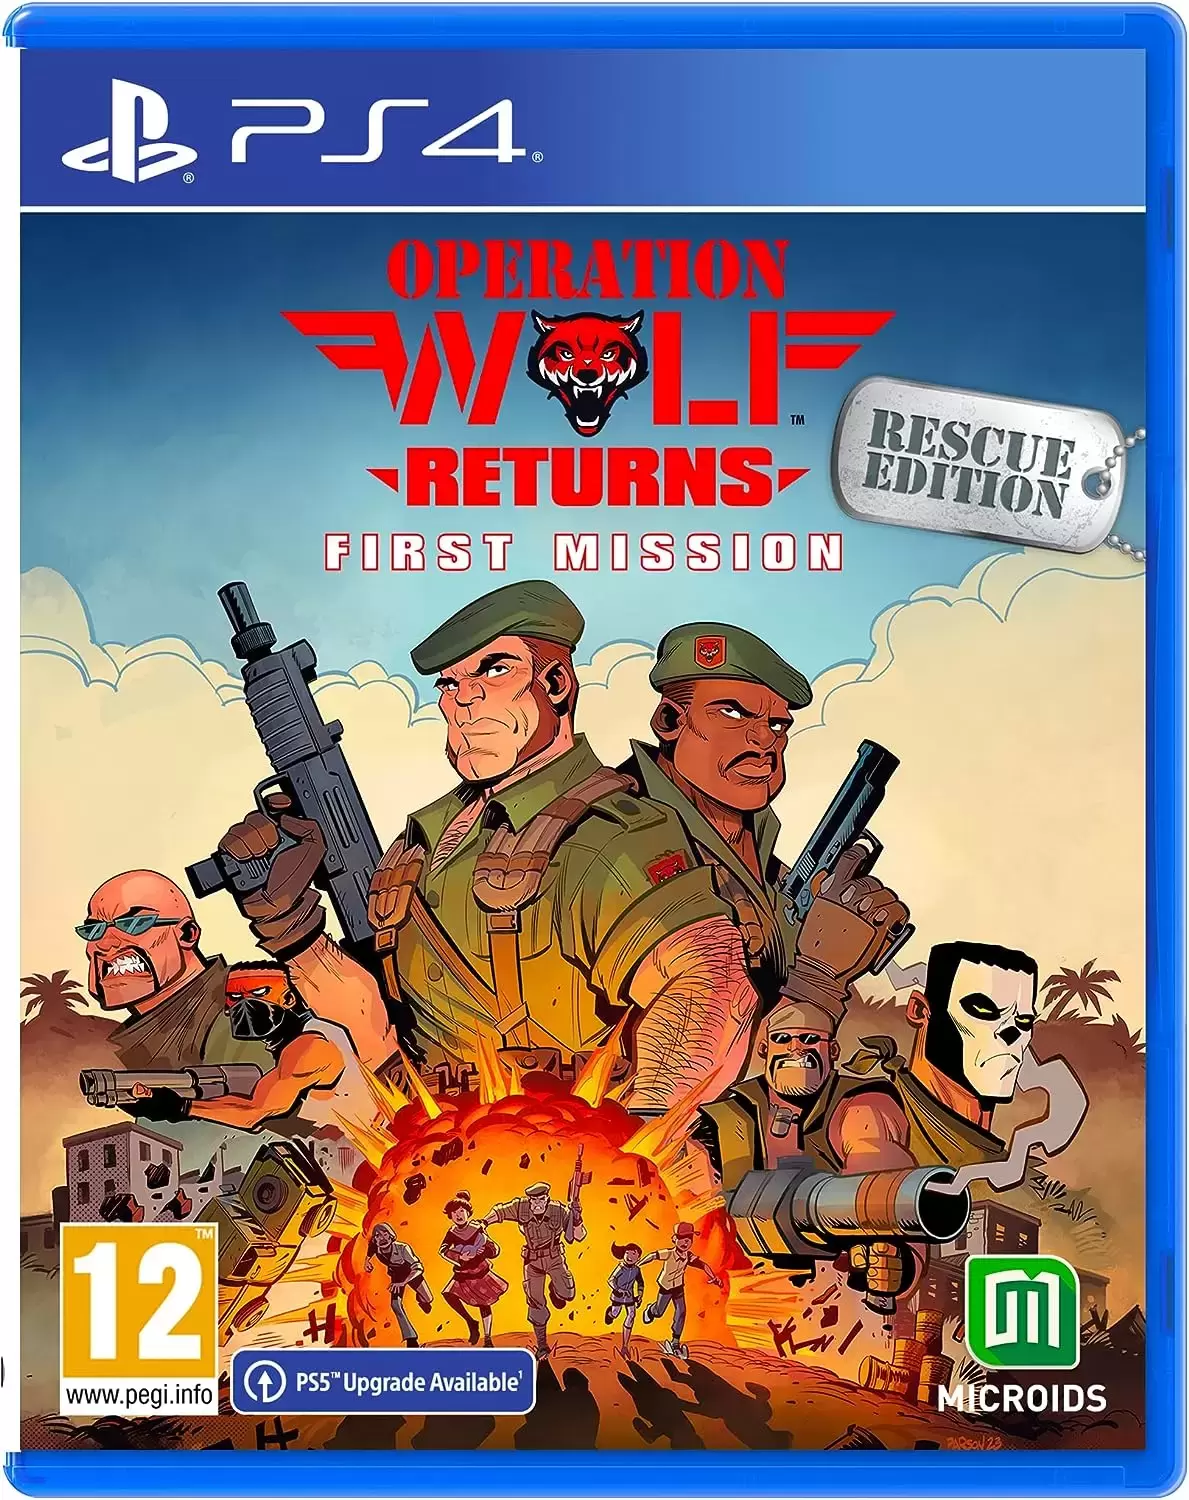 PS4 Games - Operation Wolf Returns : First Mission